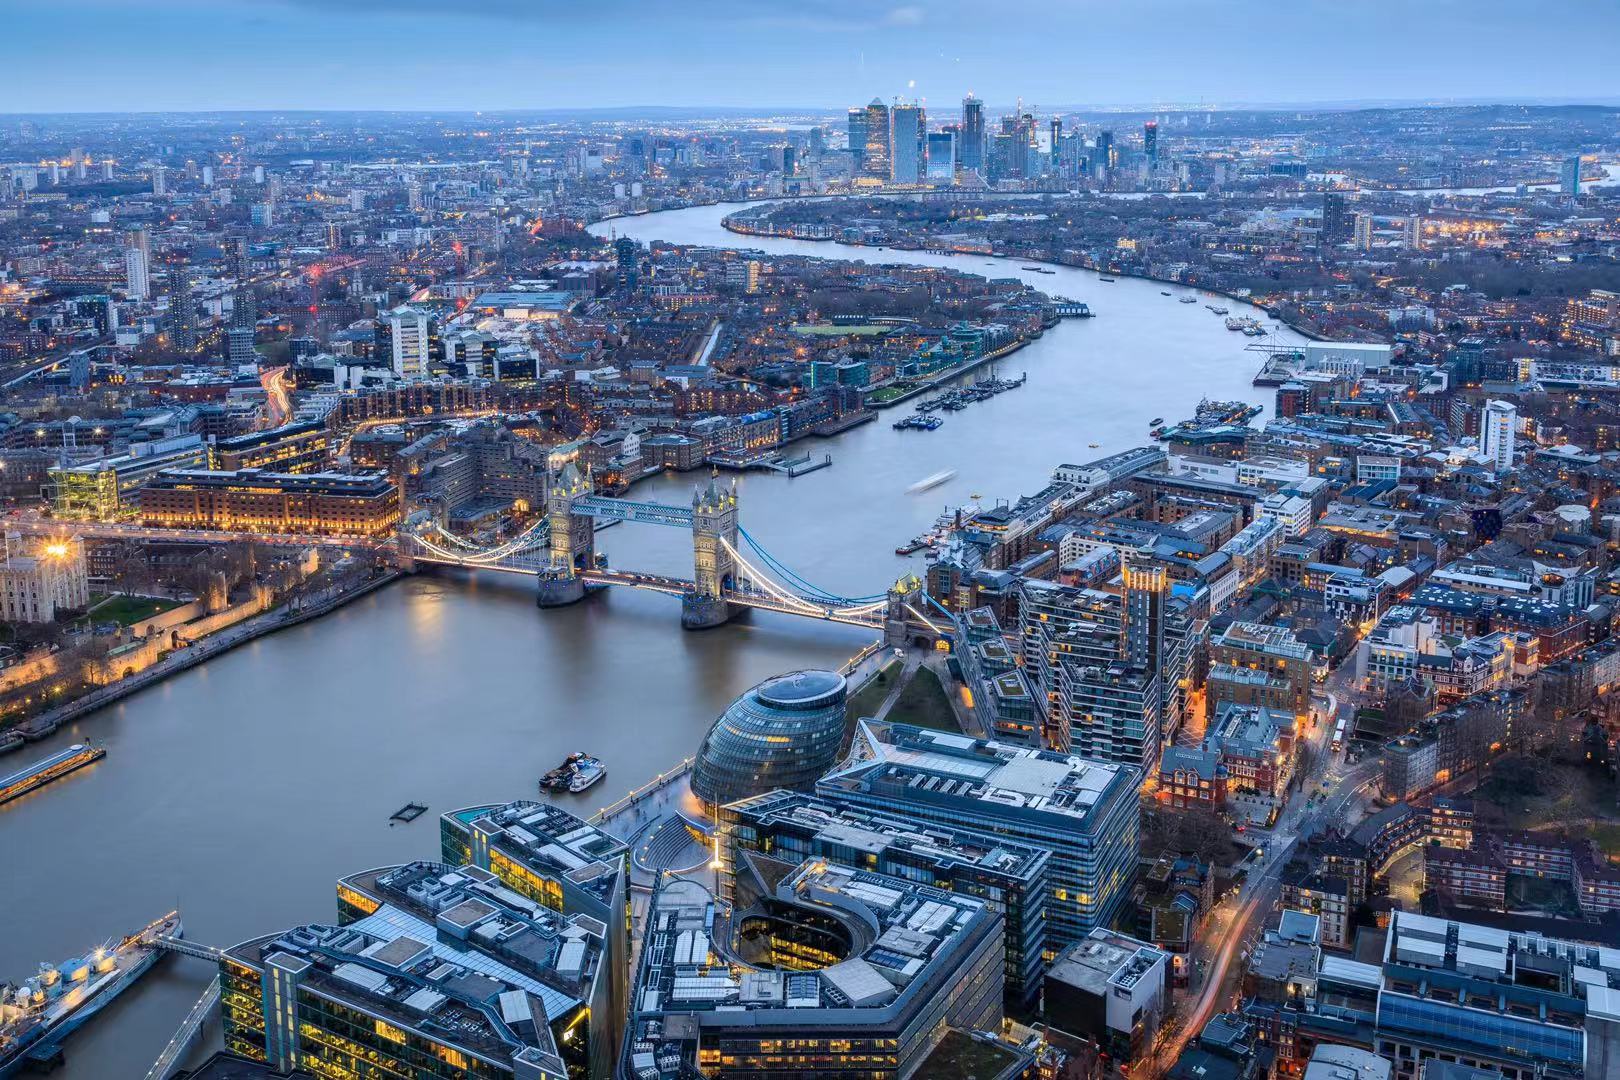 General 1620x1080 London city river Tower Bridge River Thames England cityscape evening UK aerial view